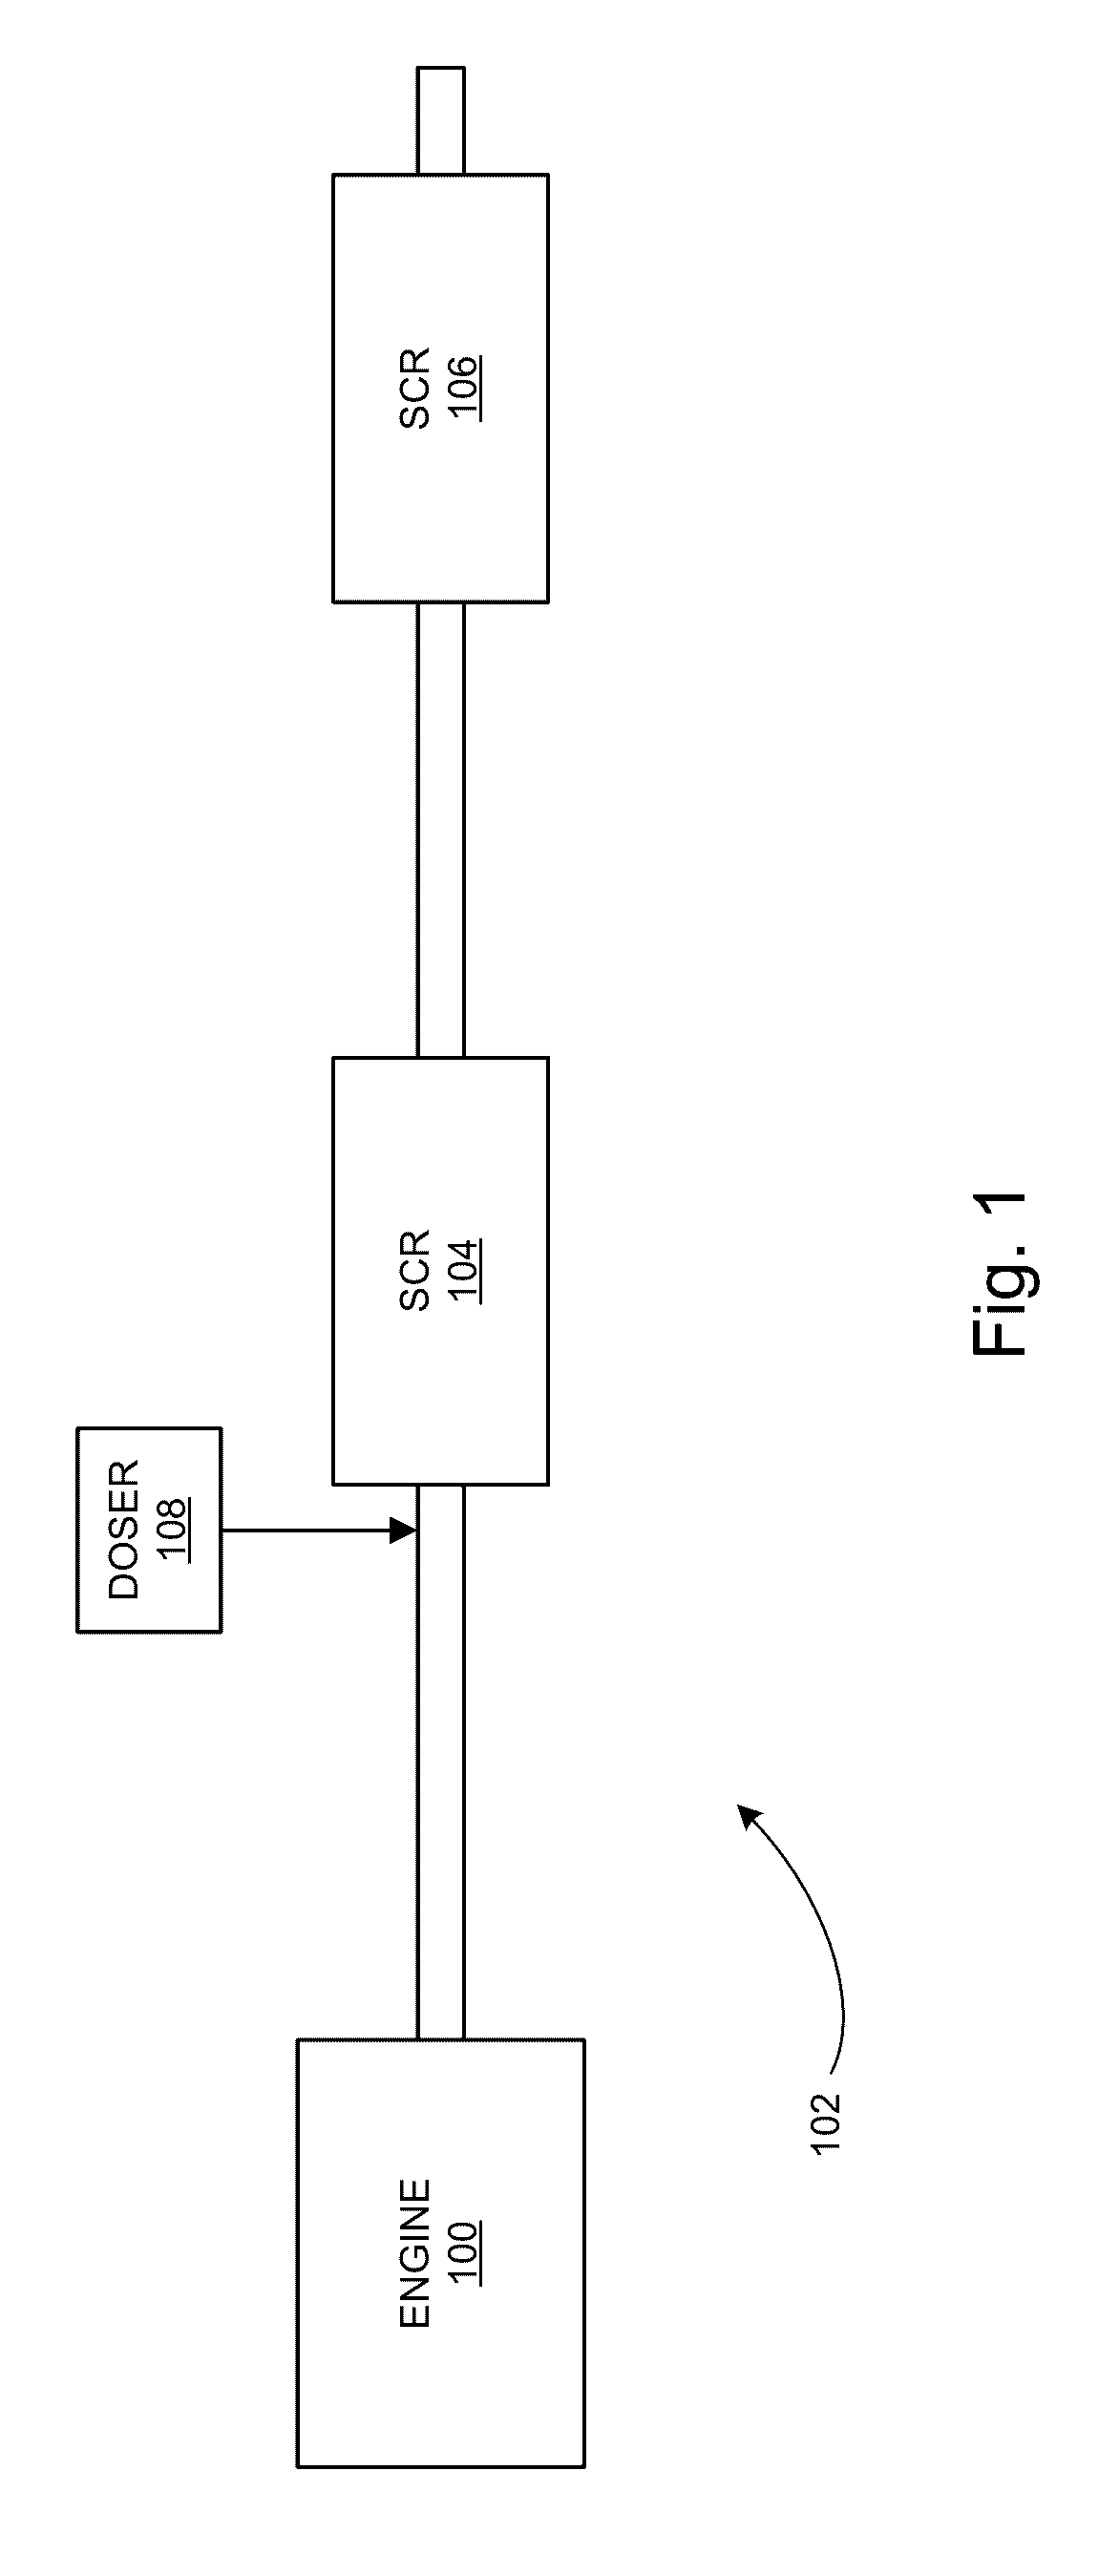 Advanced exhaust aftertreatment system architecture